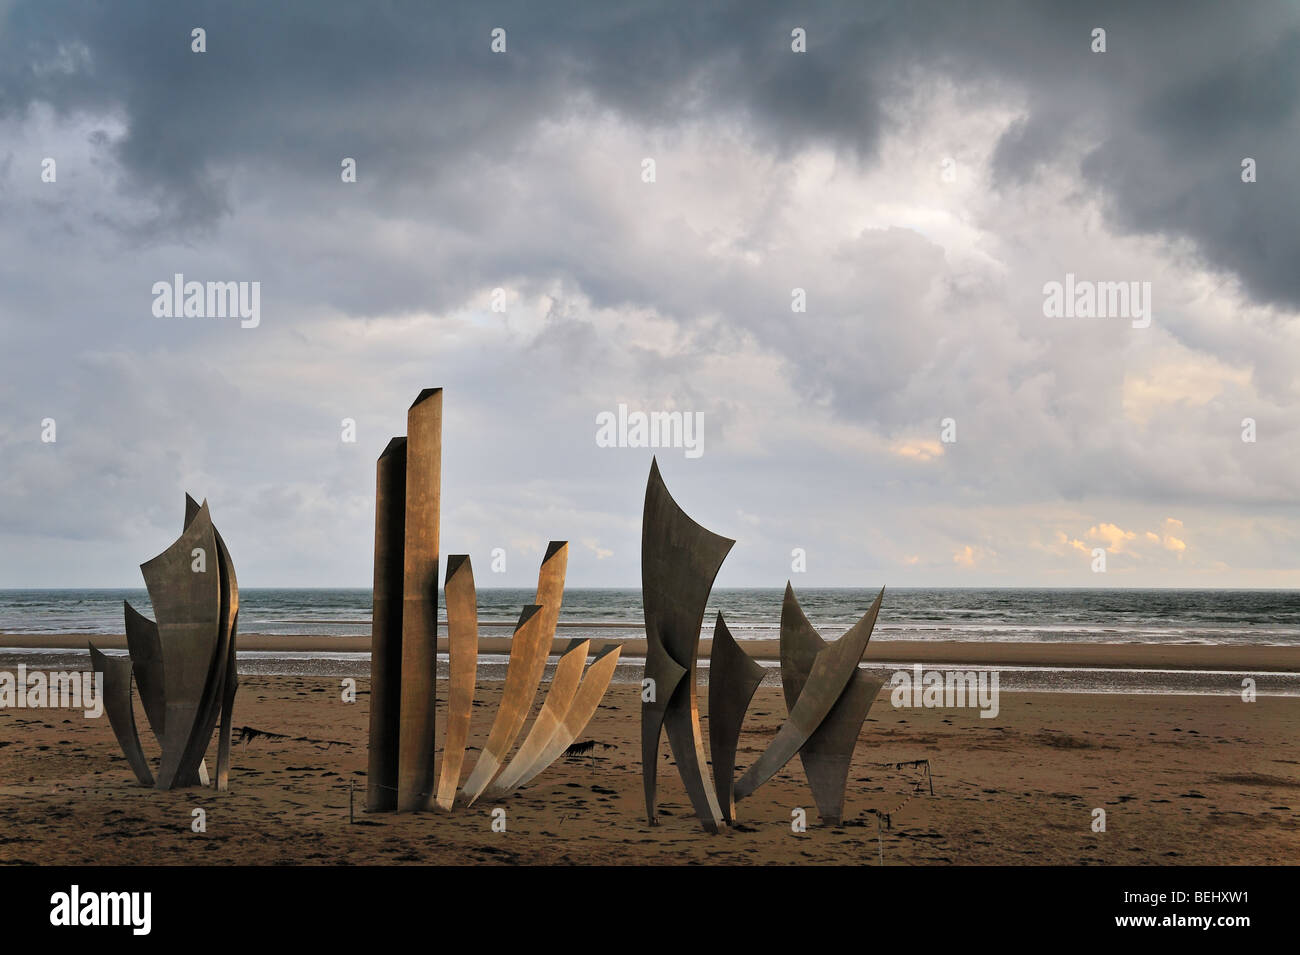 The WW2 American D-Day landing Omaha Beach monument Les Braves on the beach at Saint-Laurent-sur-Mer at sunset, Normandy, France Stock Photo